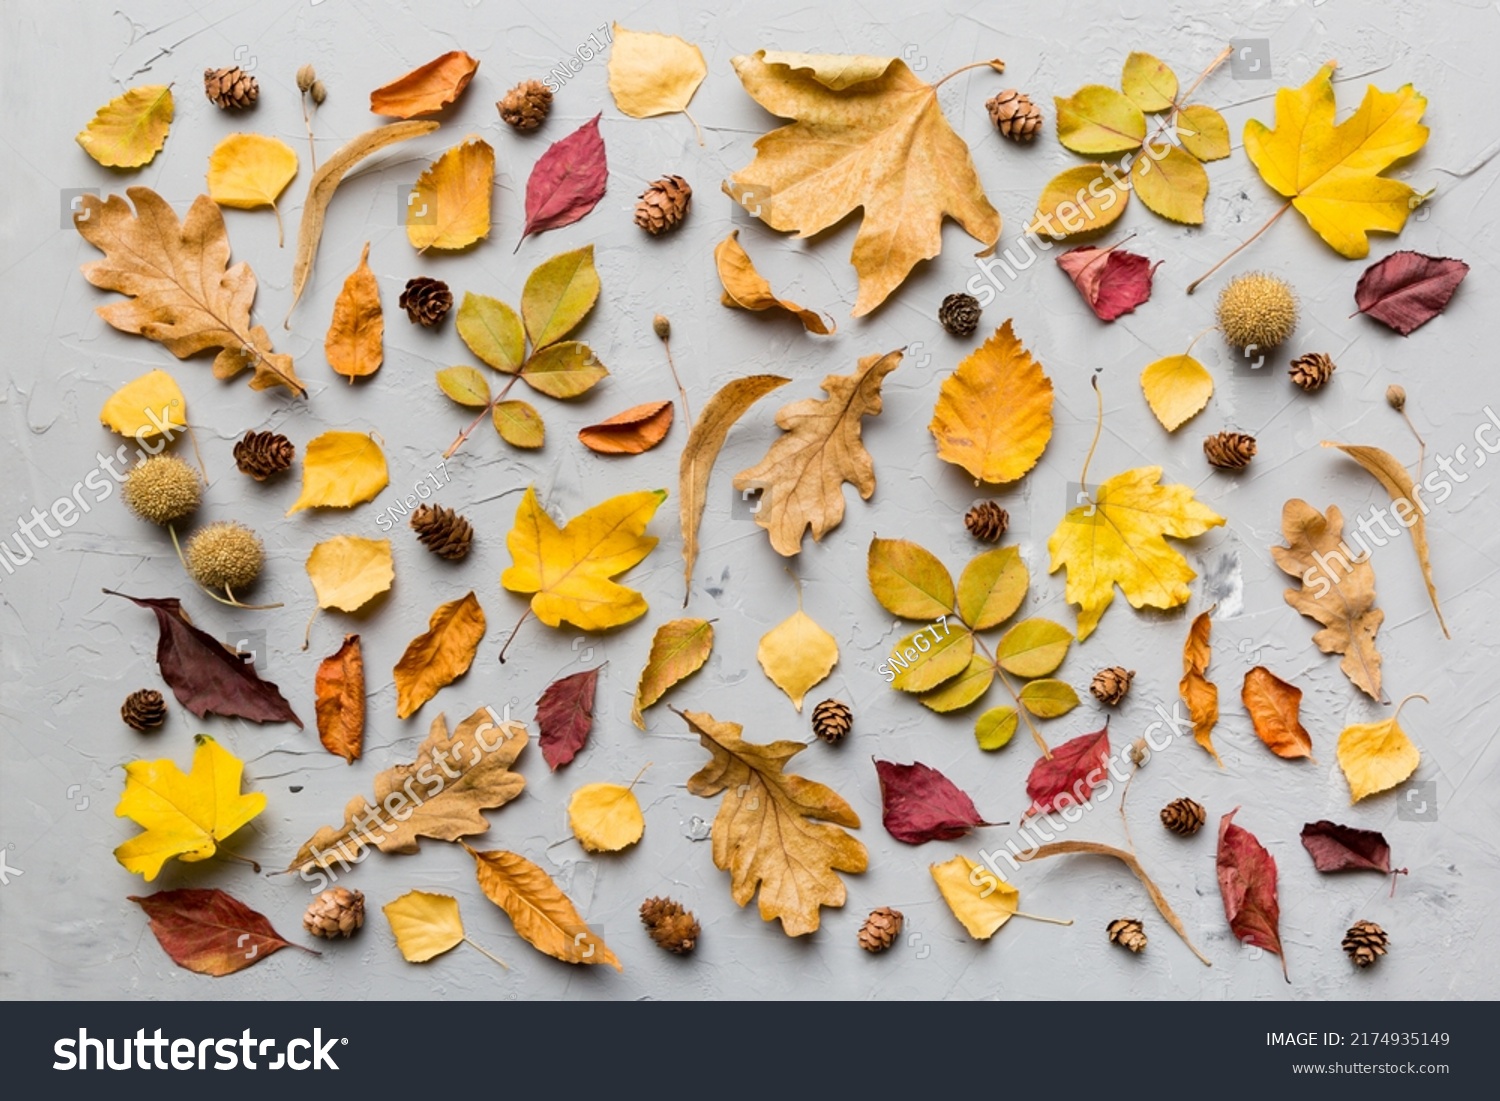 Autumn composition. Pattern made of dried leaves and other design accessories on table. Flat lay, top view. #2174935149